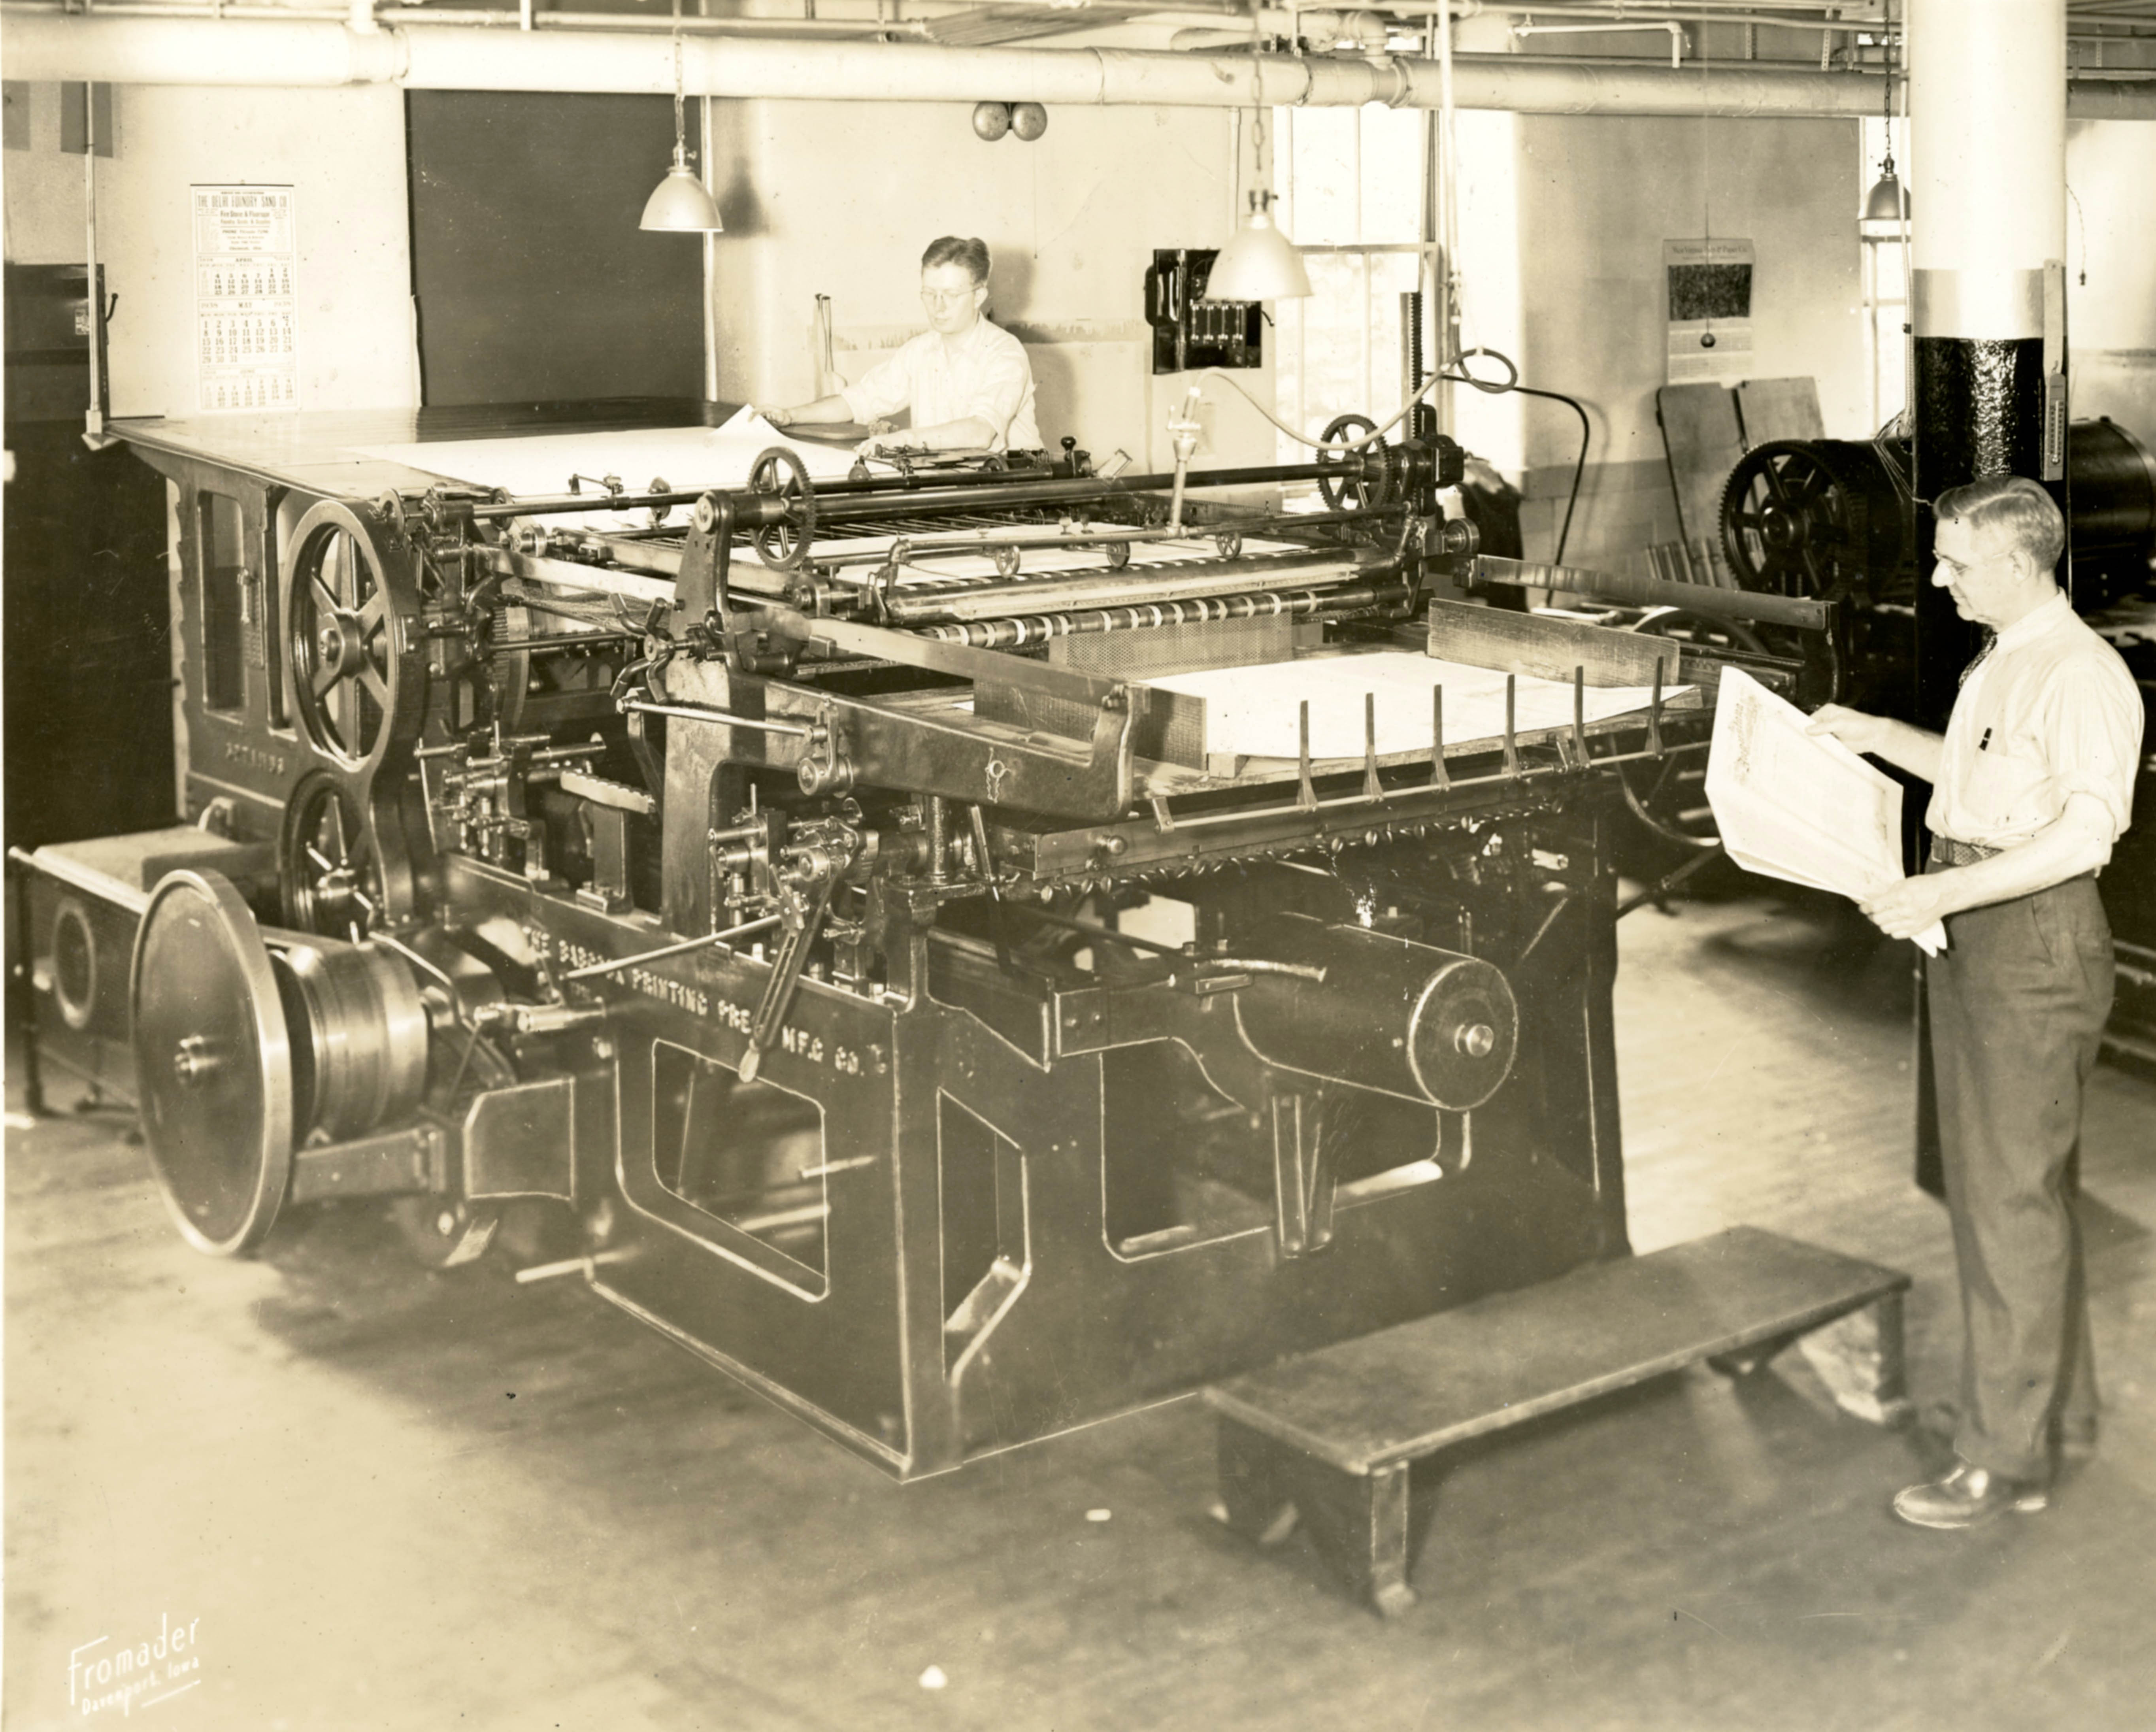 Printing Press at the Augustana Book Concern, late 1920s